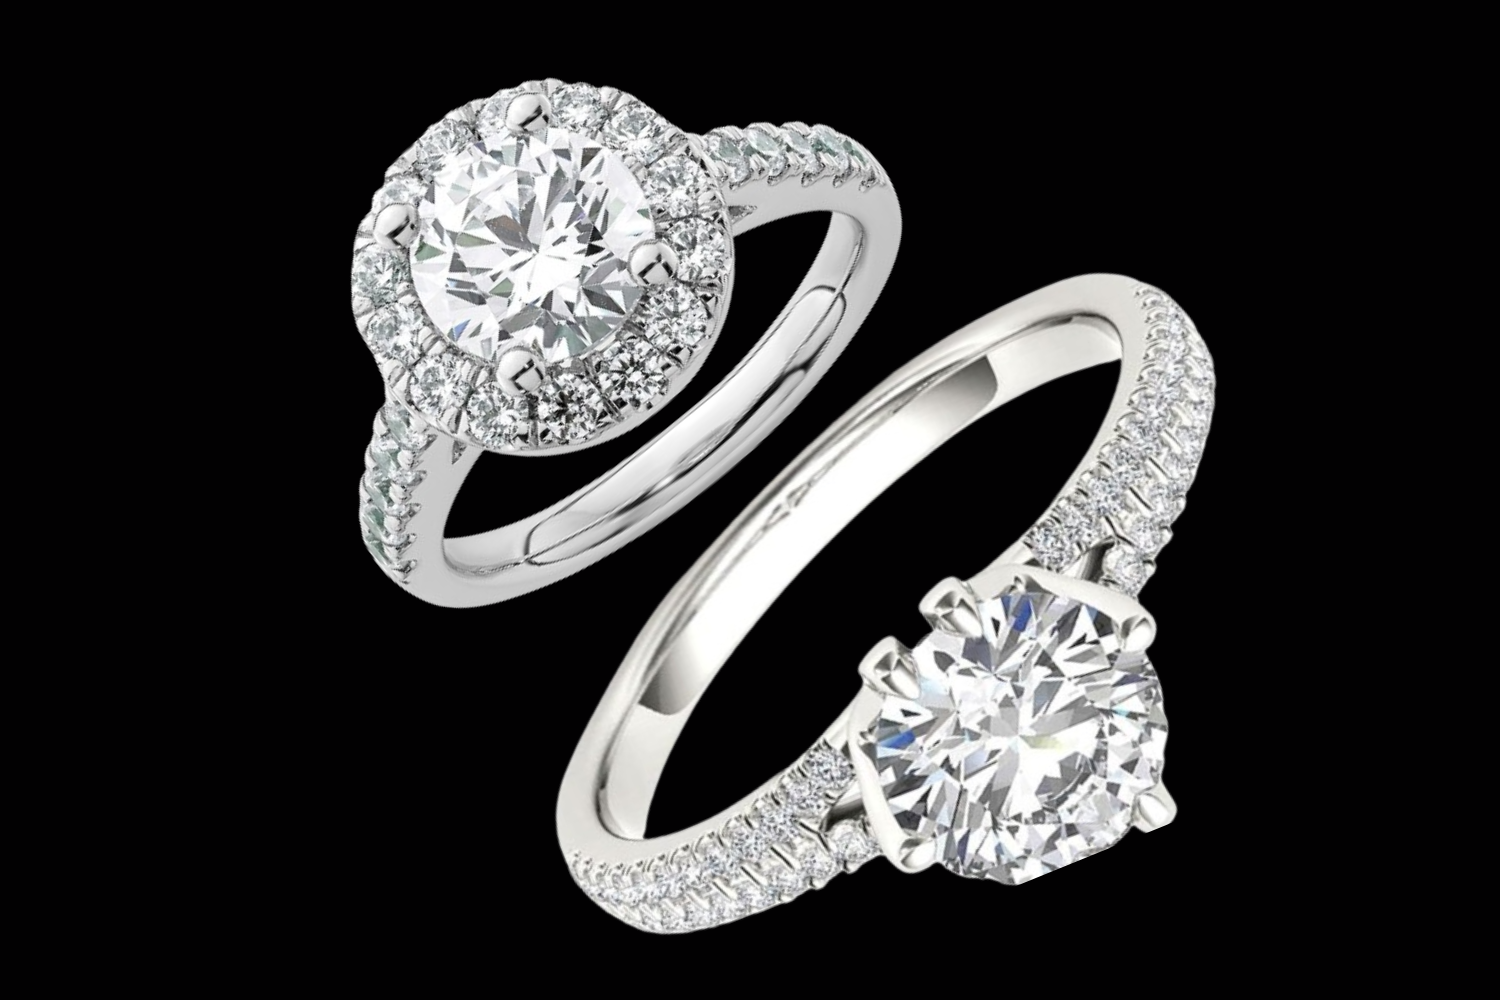 What Is The 6.5 Carat Diamond Ring Market Price?